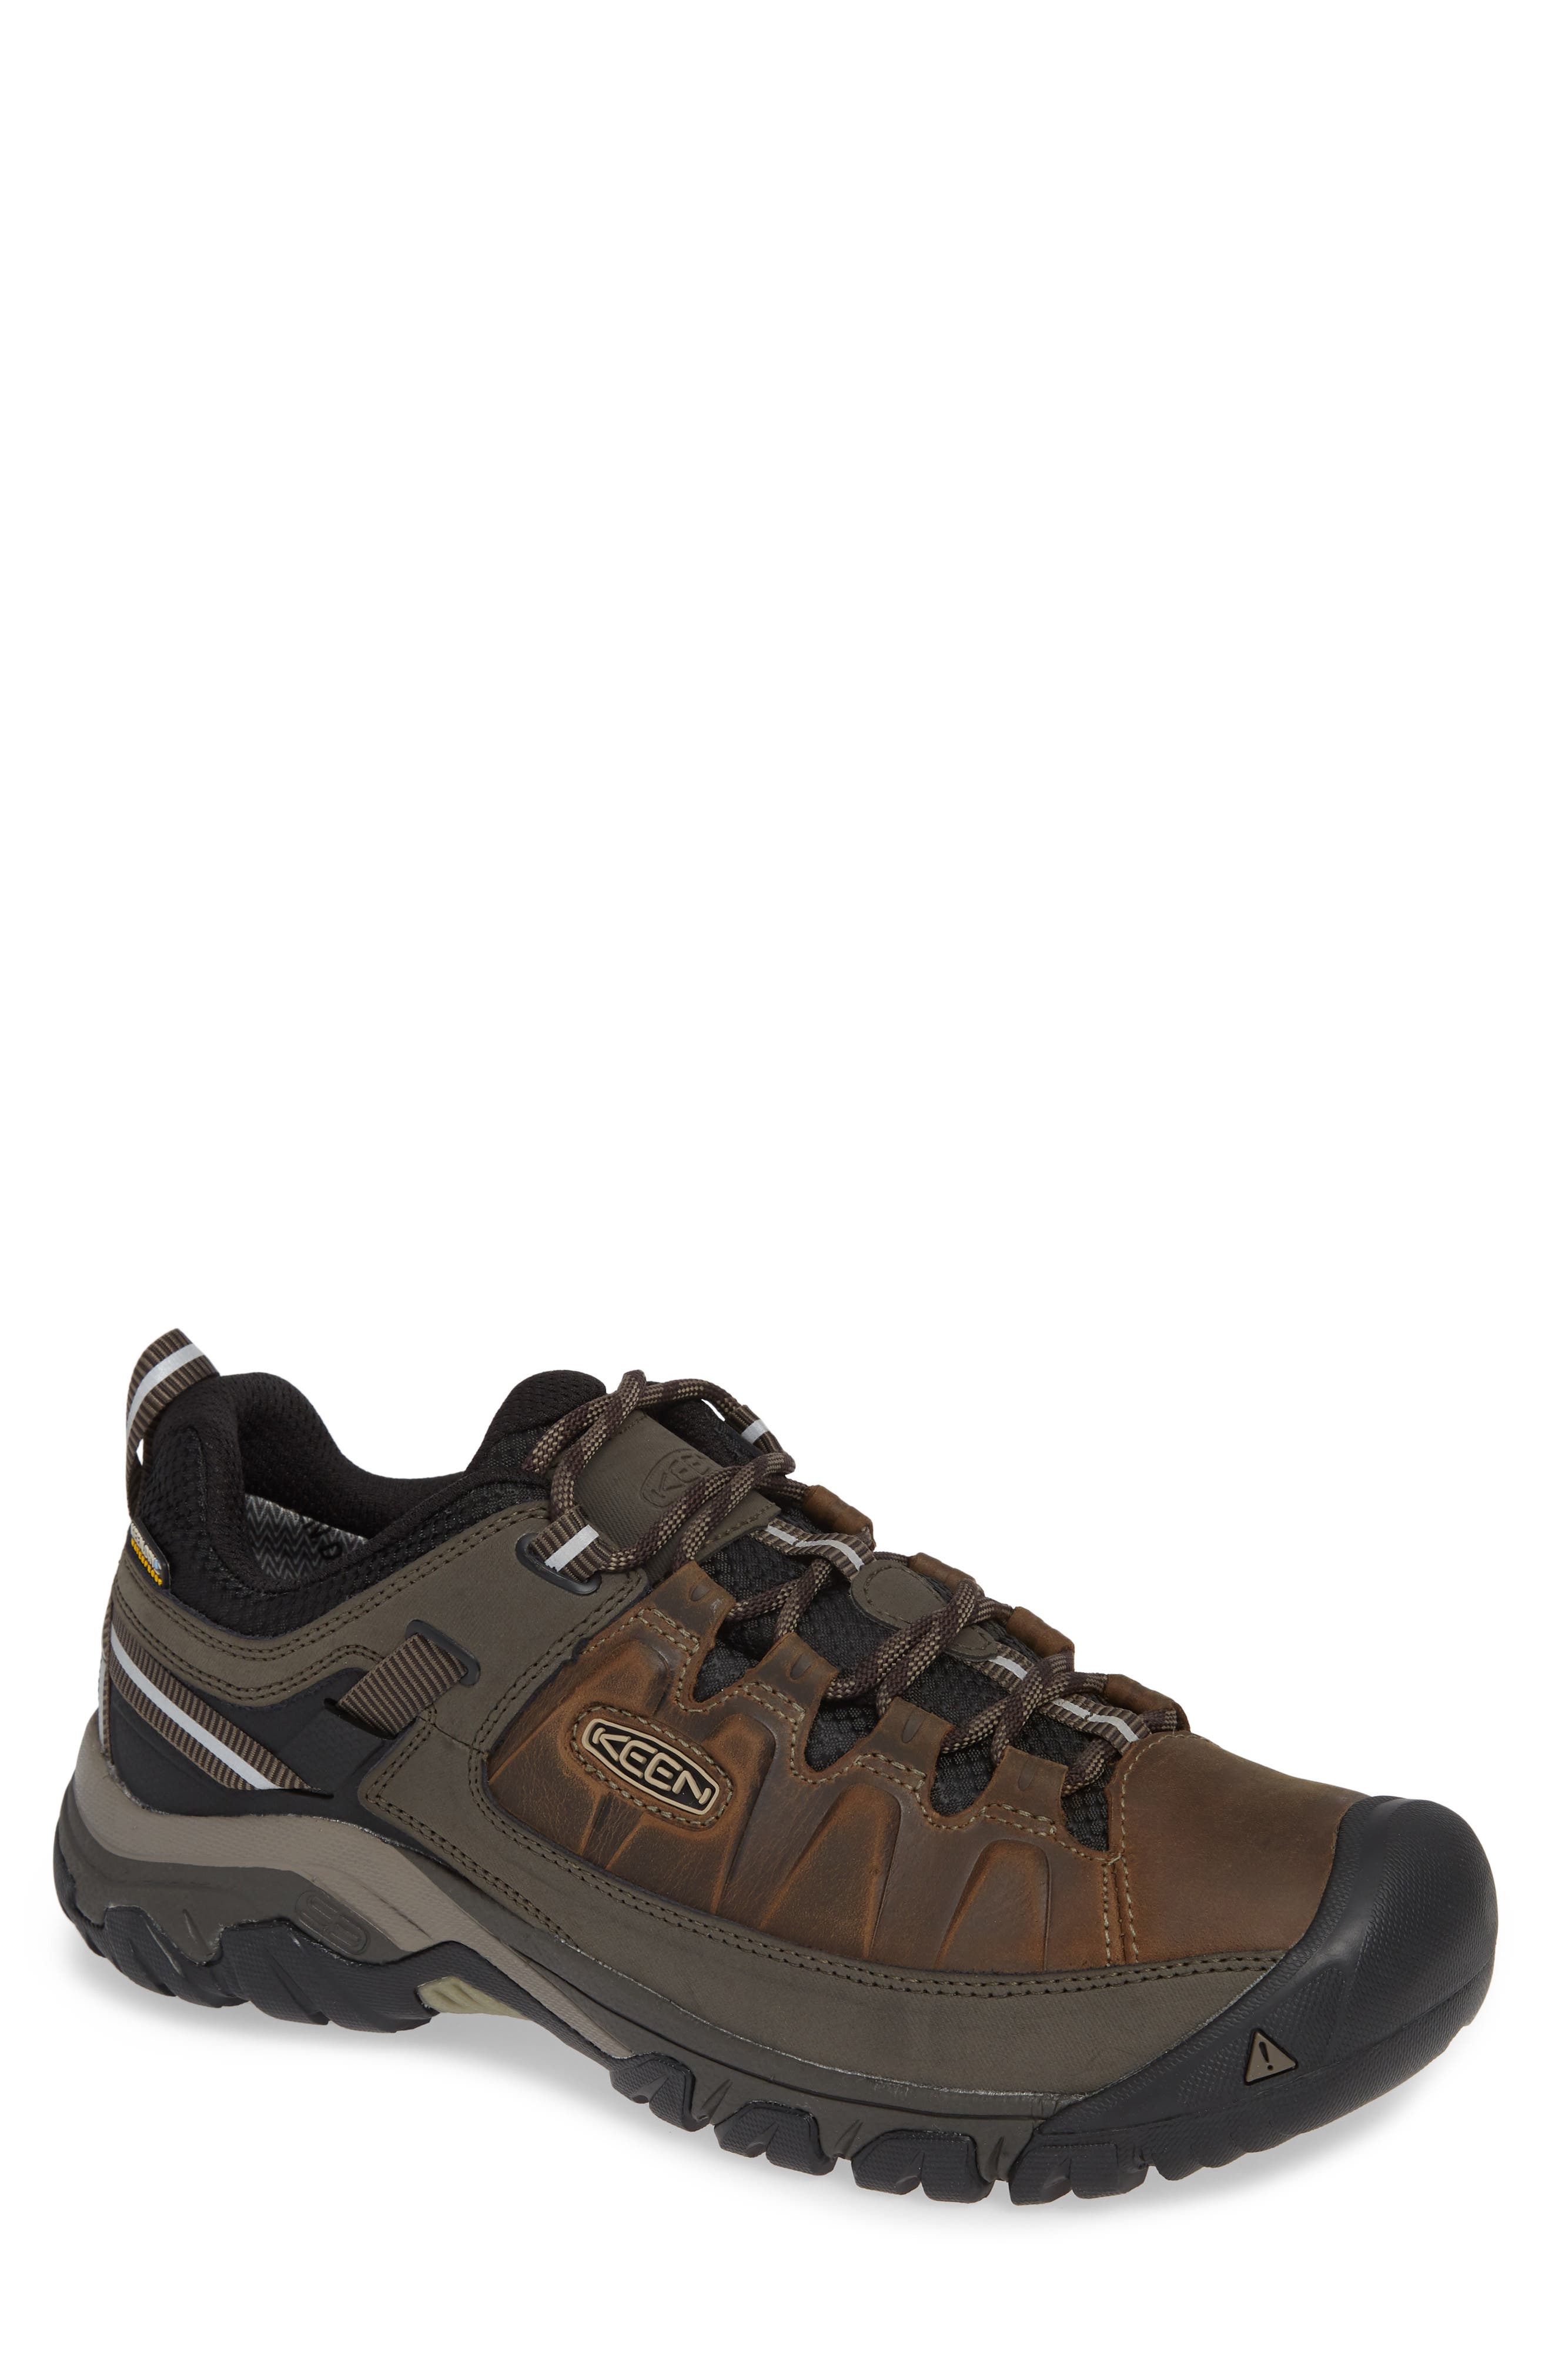 nordstrom mens hiking boots